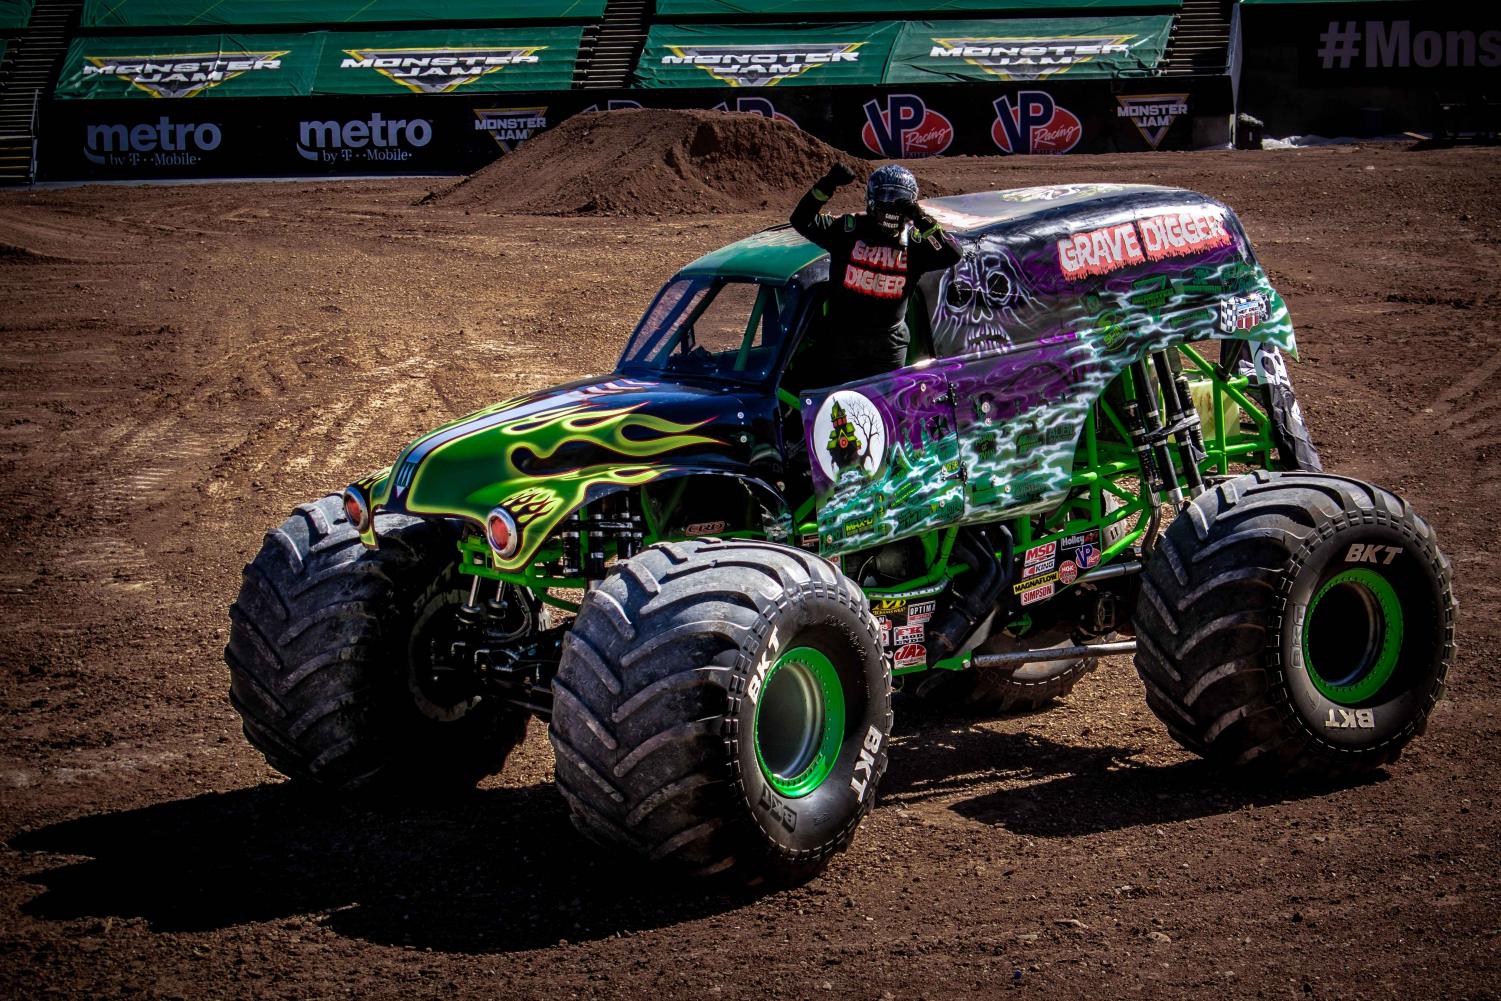 Monster+Jam+returns+to+UTEP+for+two+action+packed+days